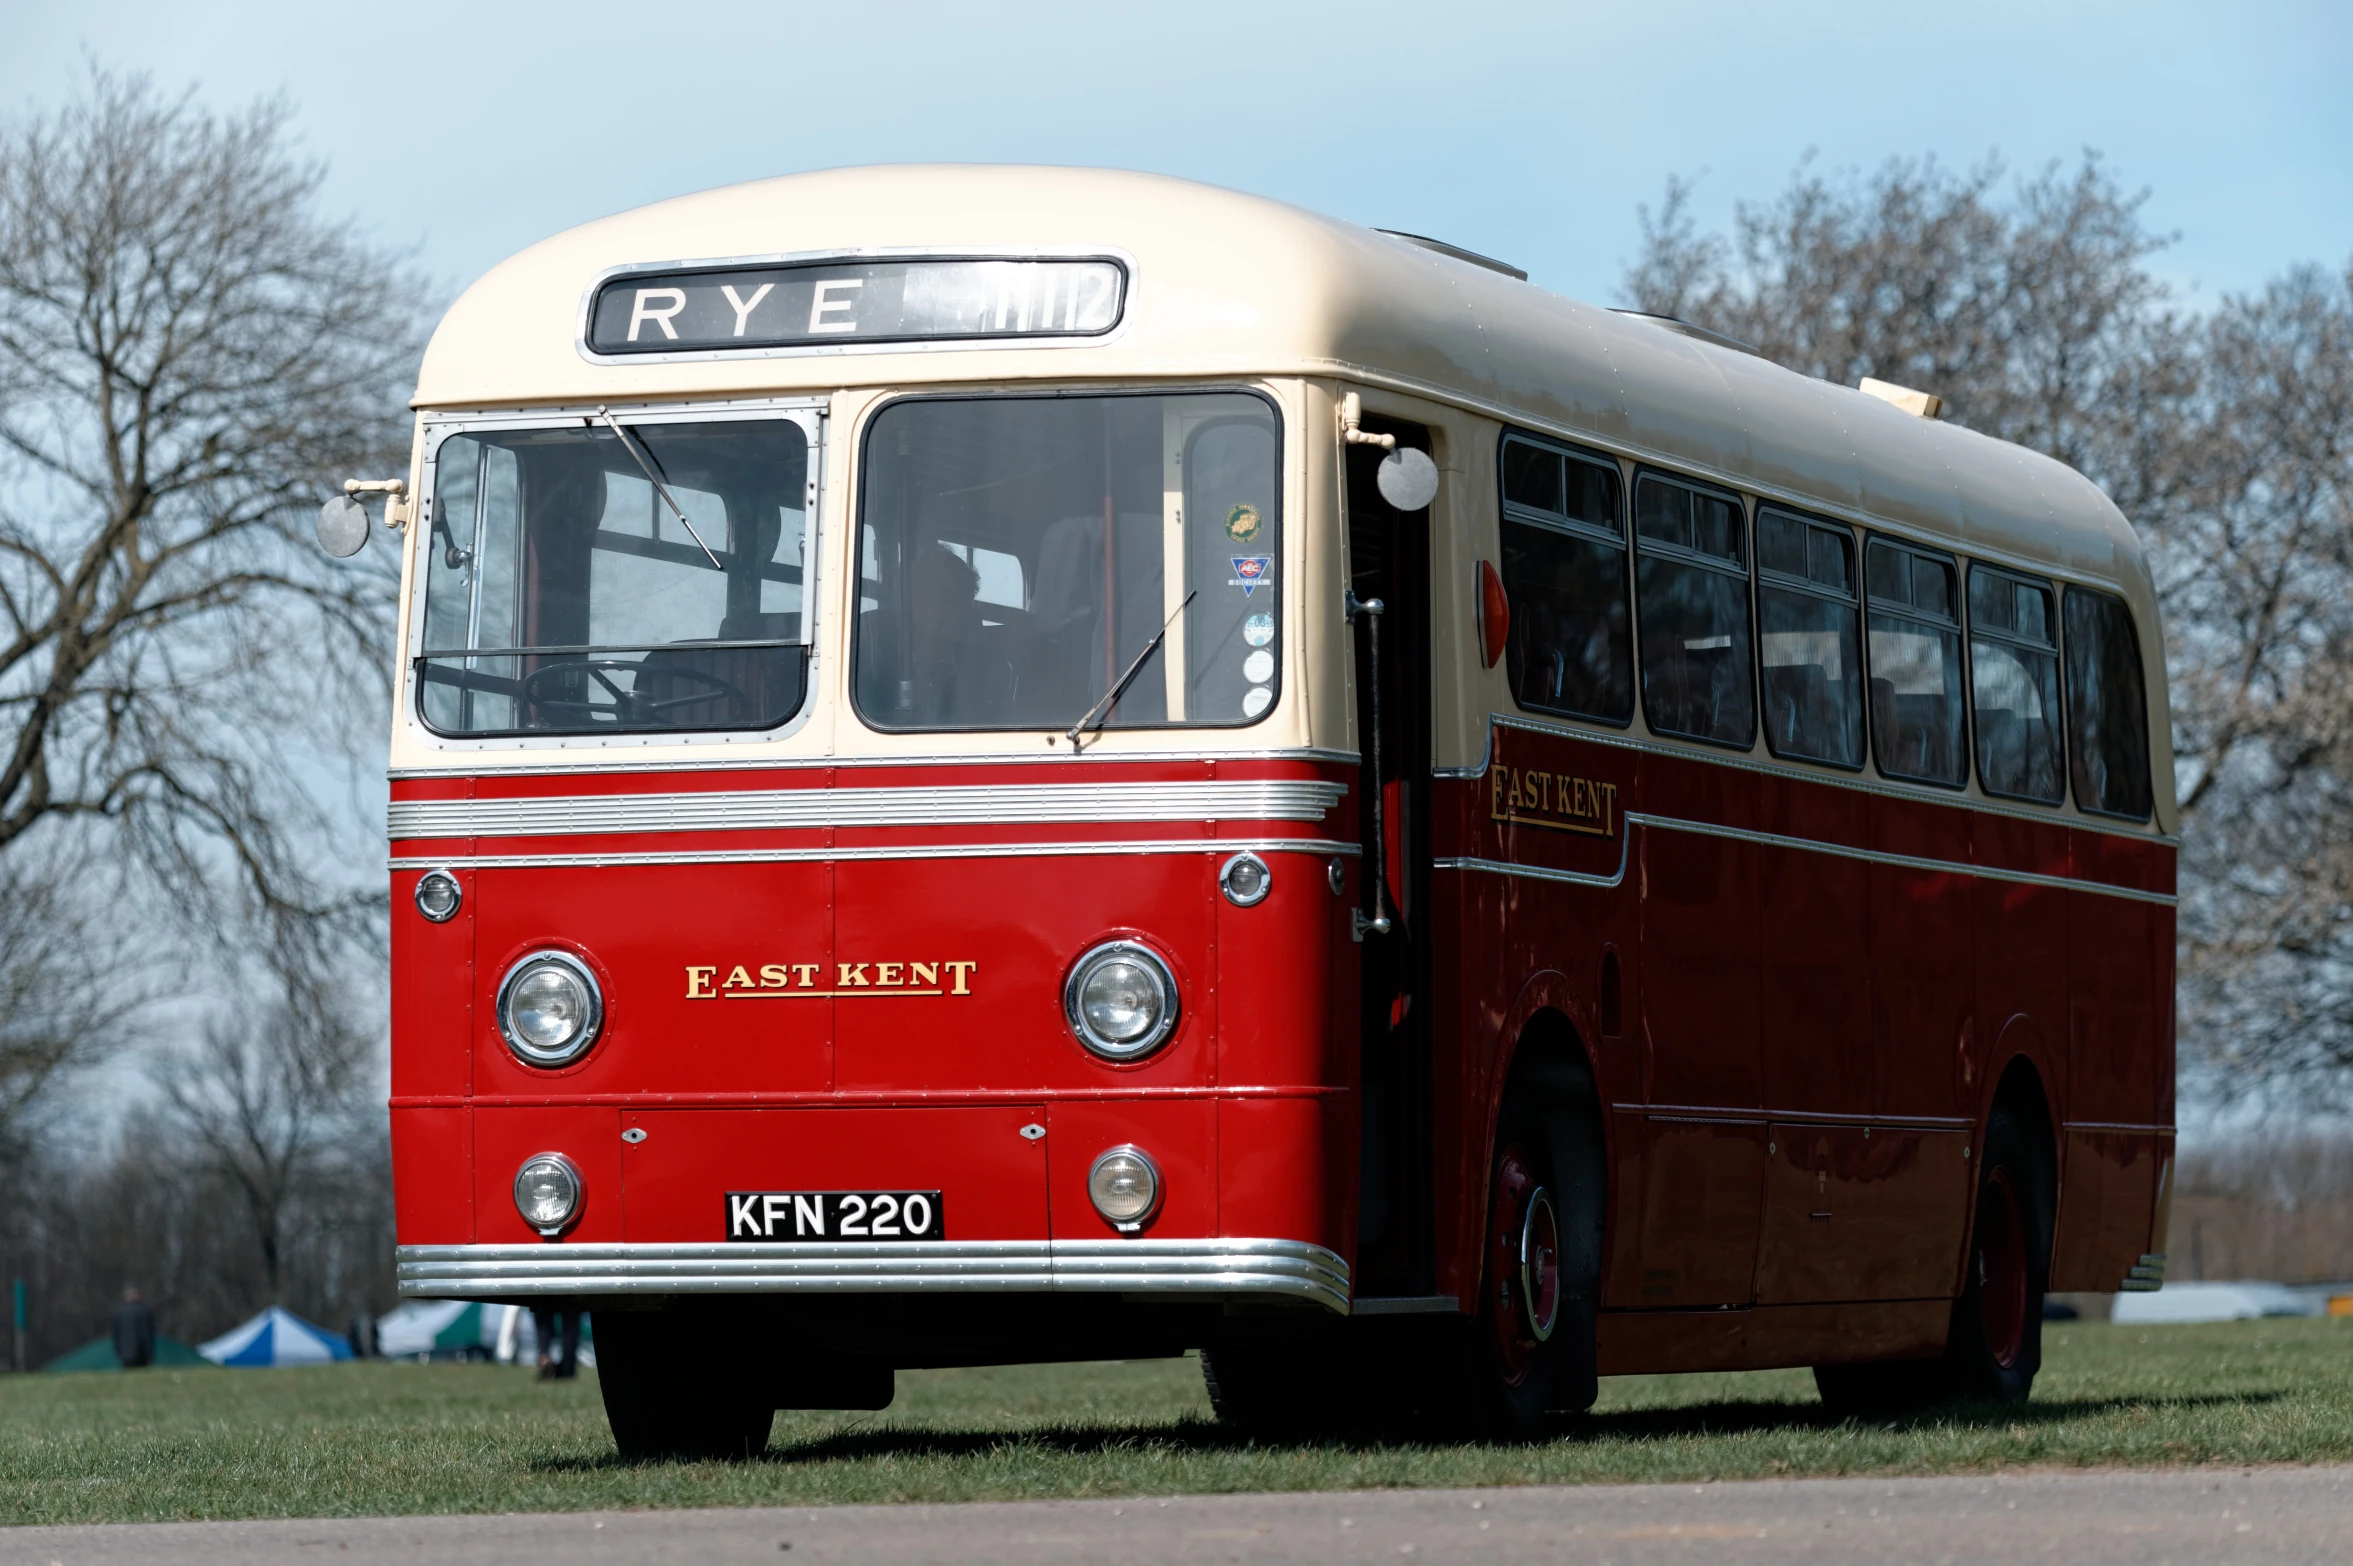 the old bus is on display at the event